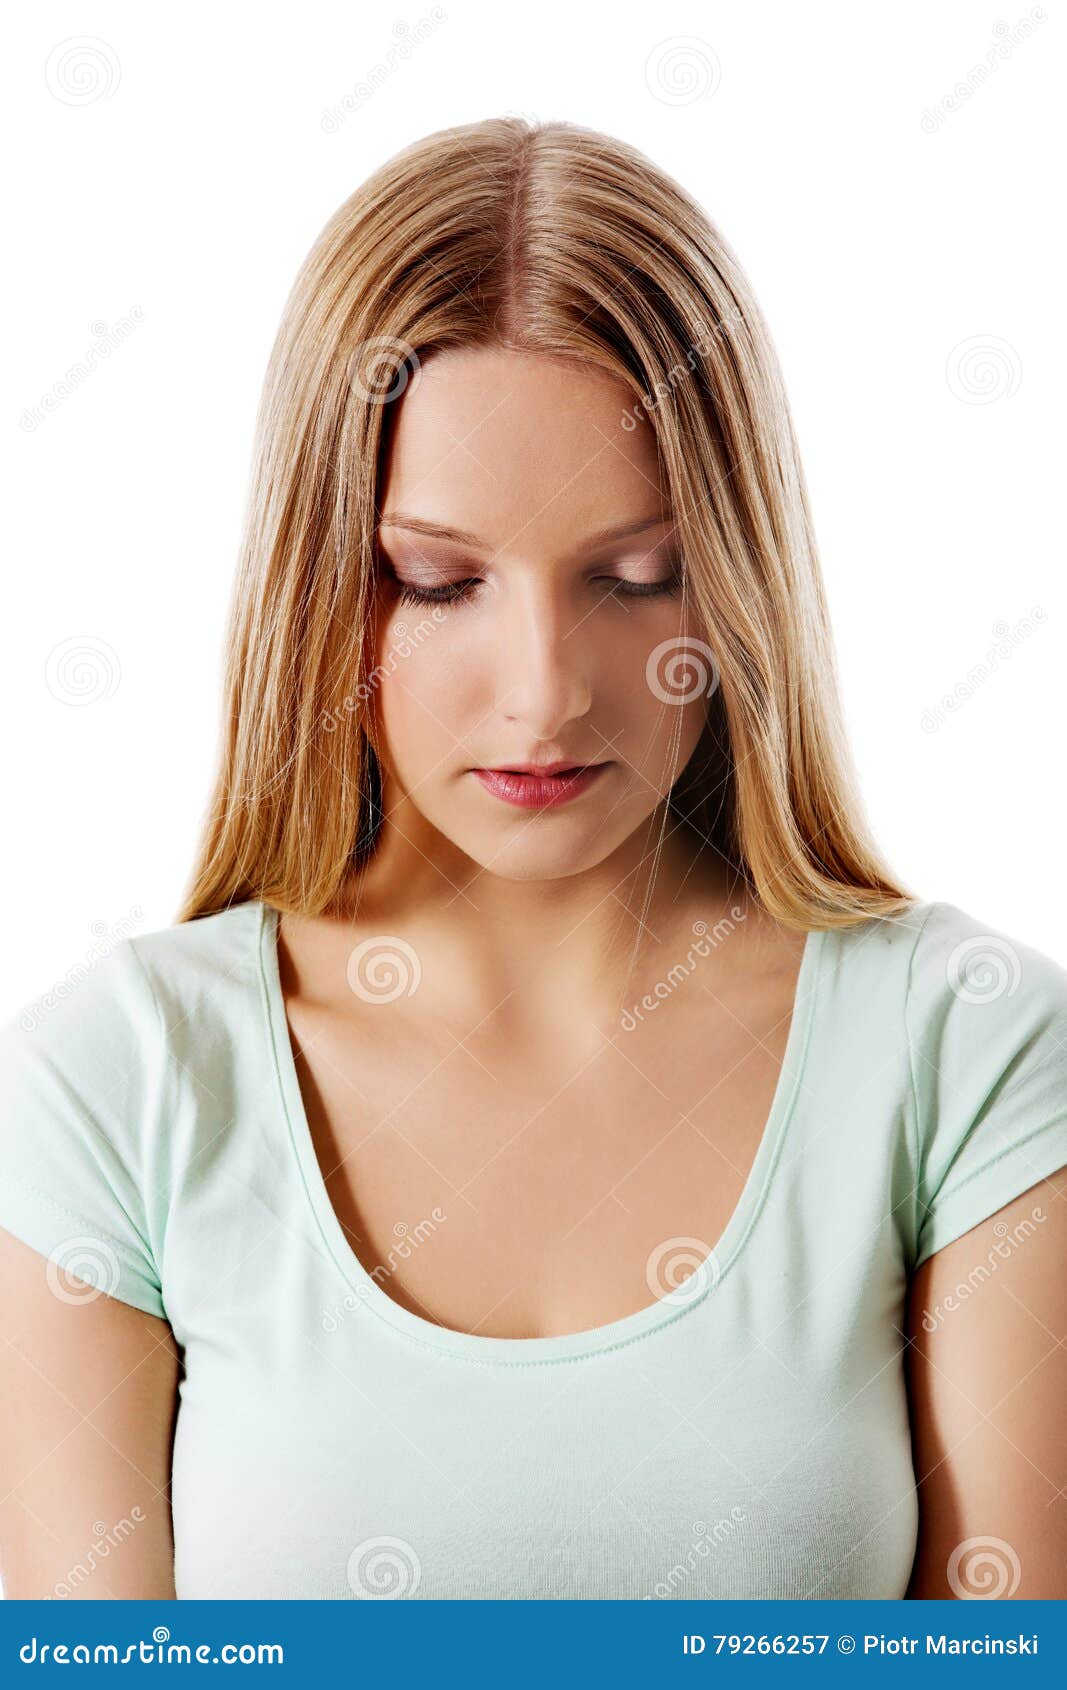 A Young Sad Woman, Isolated on White Background. Stock Image - Image of ...